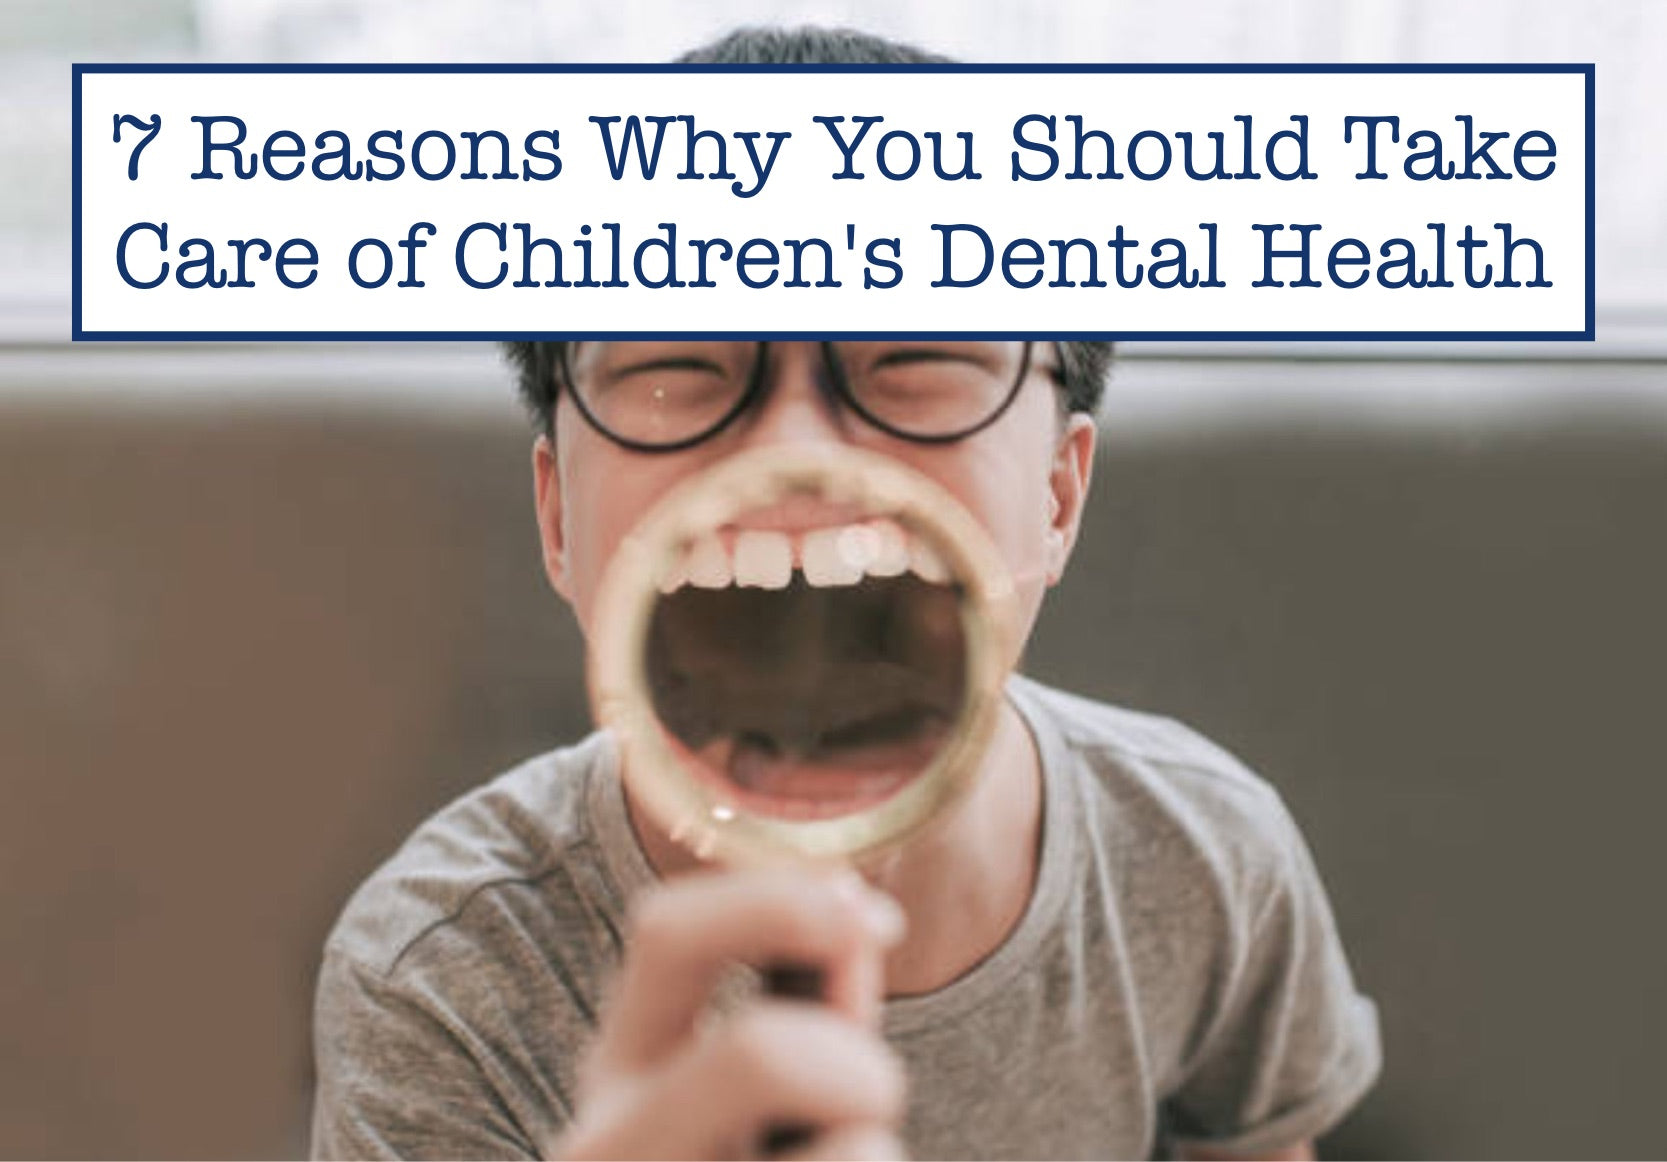 7 Reasons Why You Should Take Care of Children's Dental Health